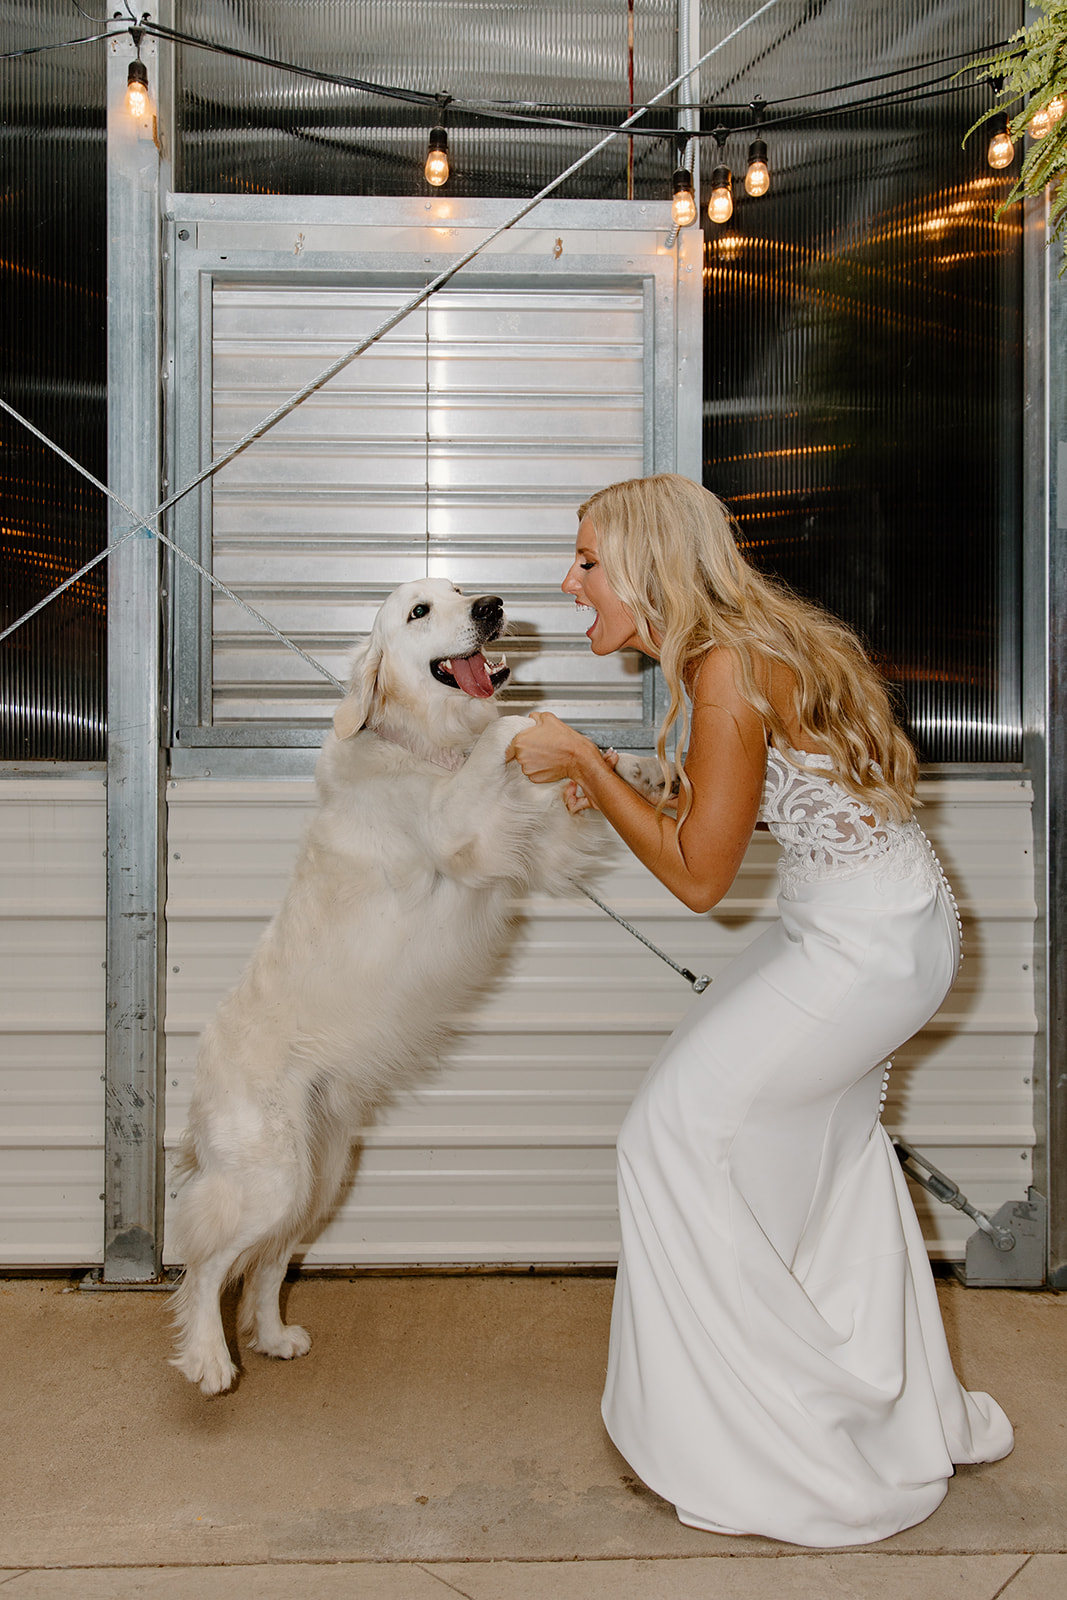 Bride dances with her dog